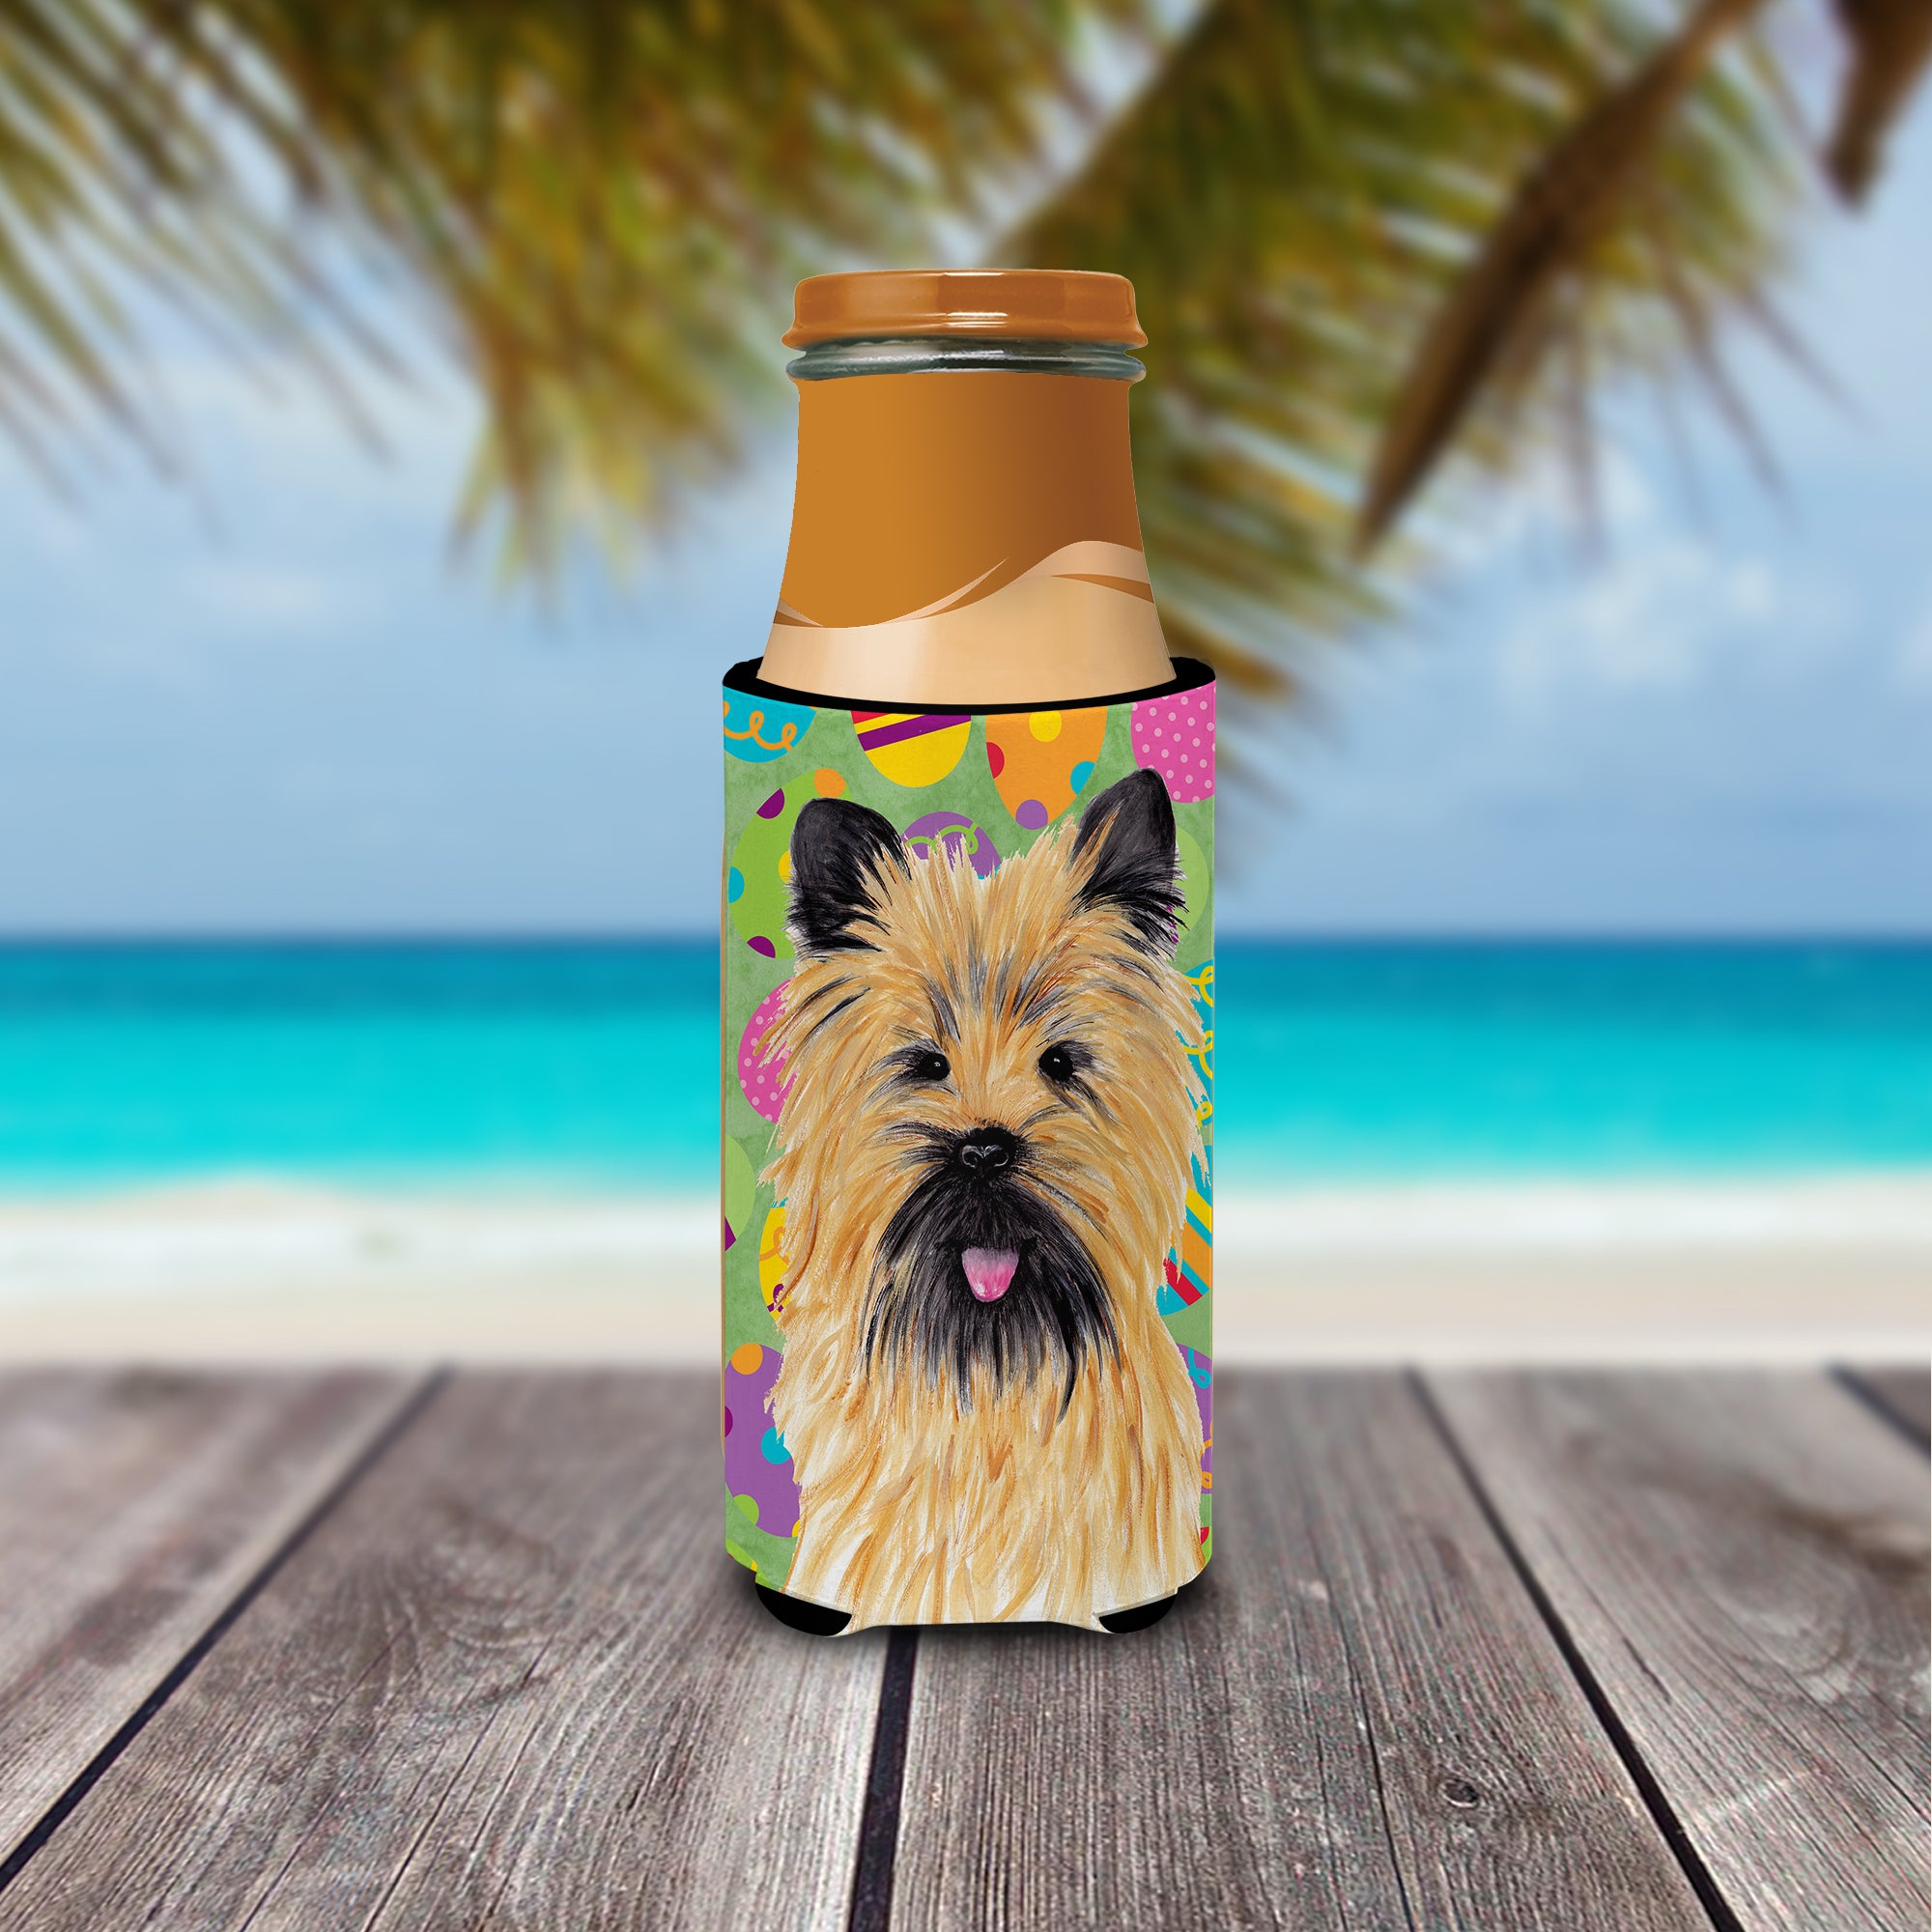 Cairn Terrier Easter Eggtravaganza Ultra Beverage Insulators for slim cans SC9455MUK